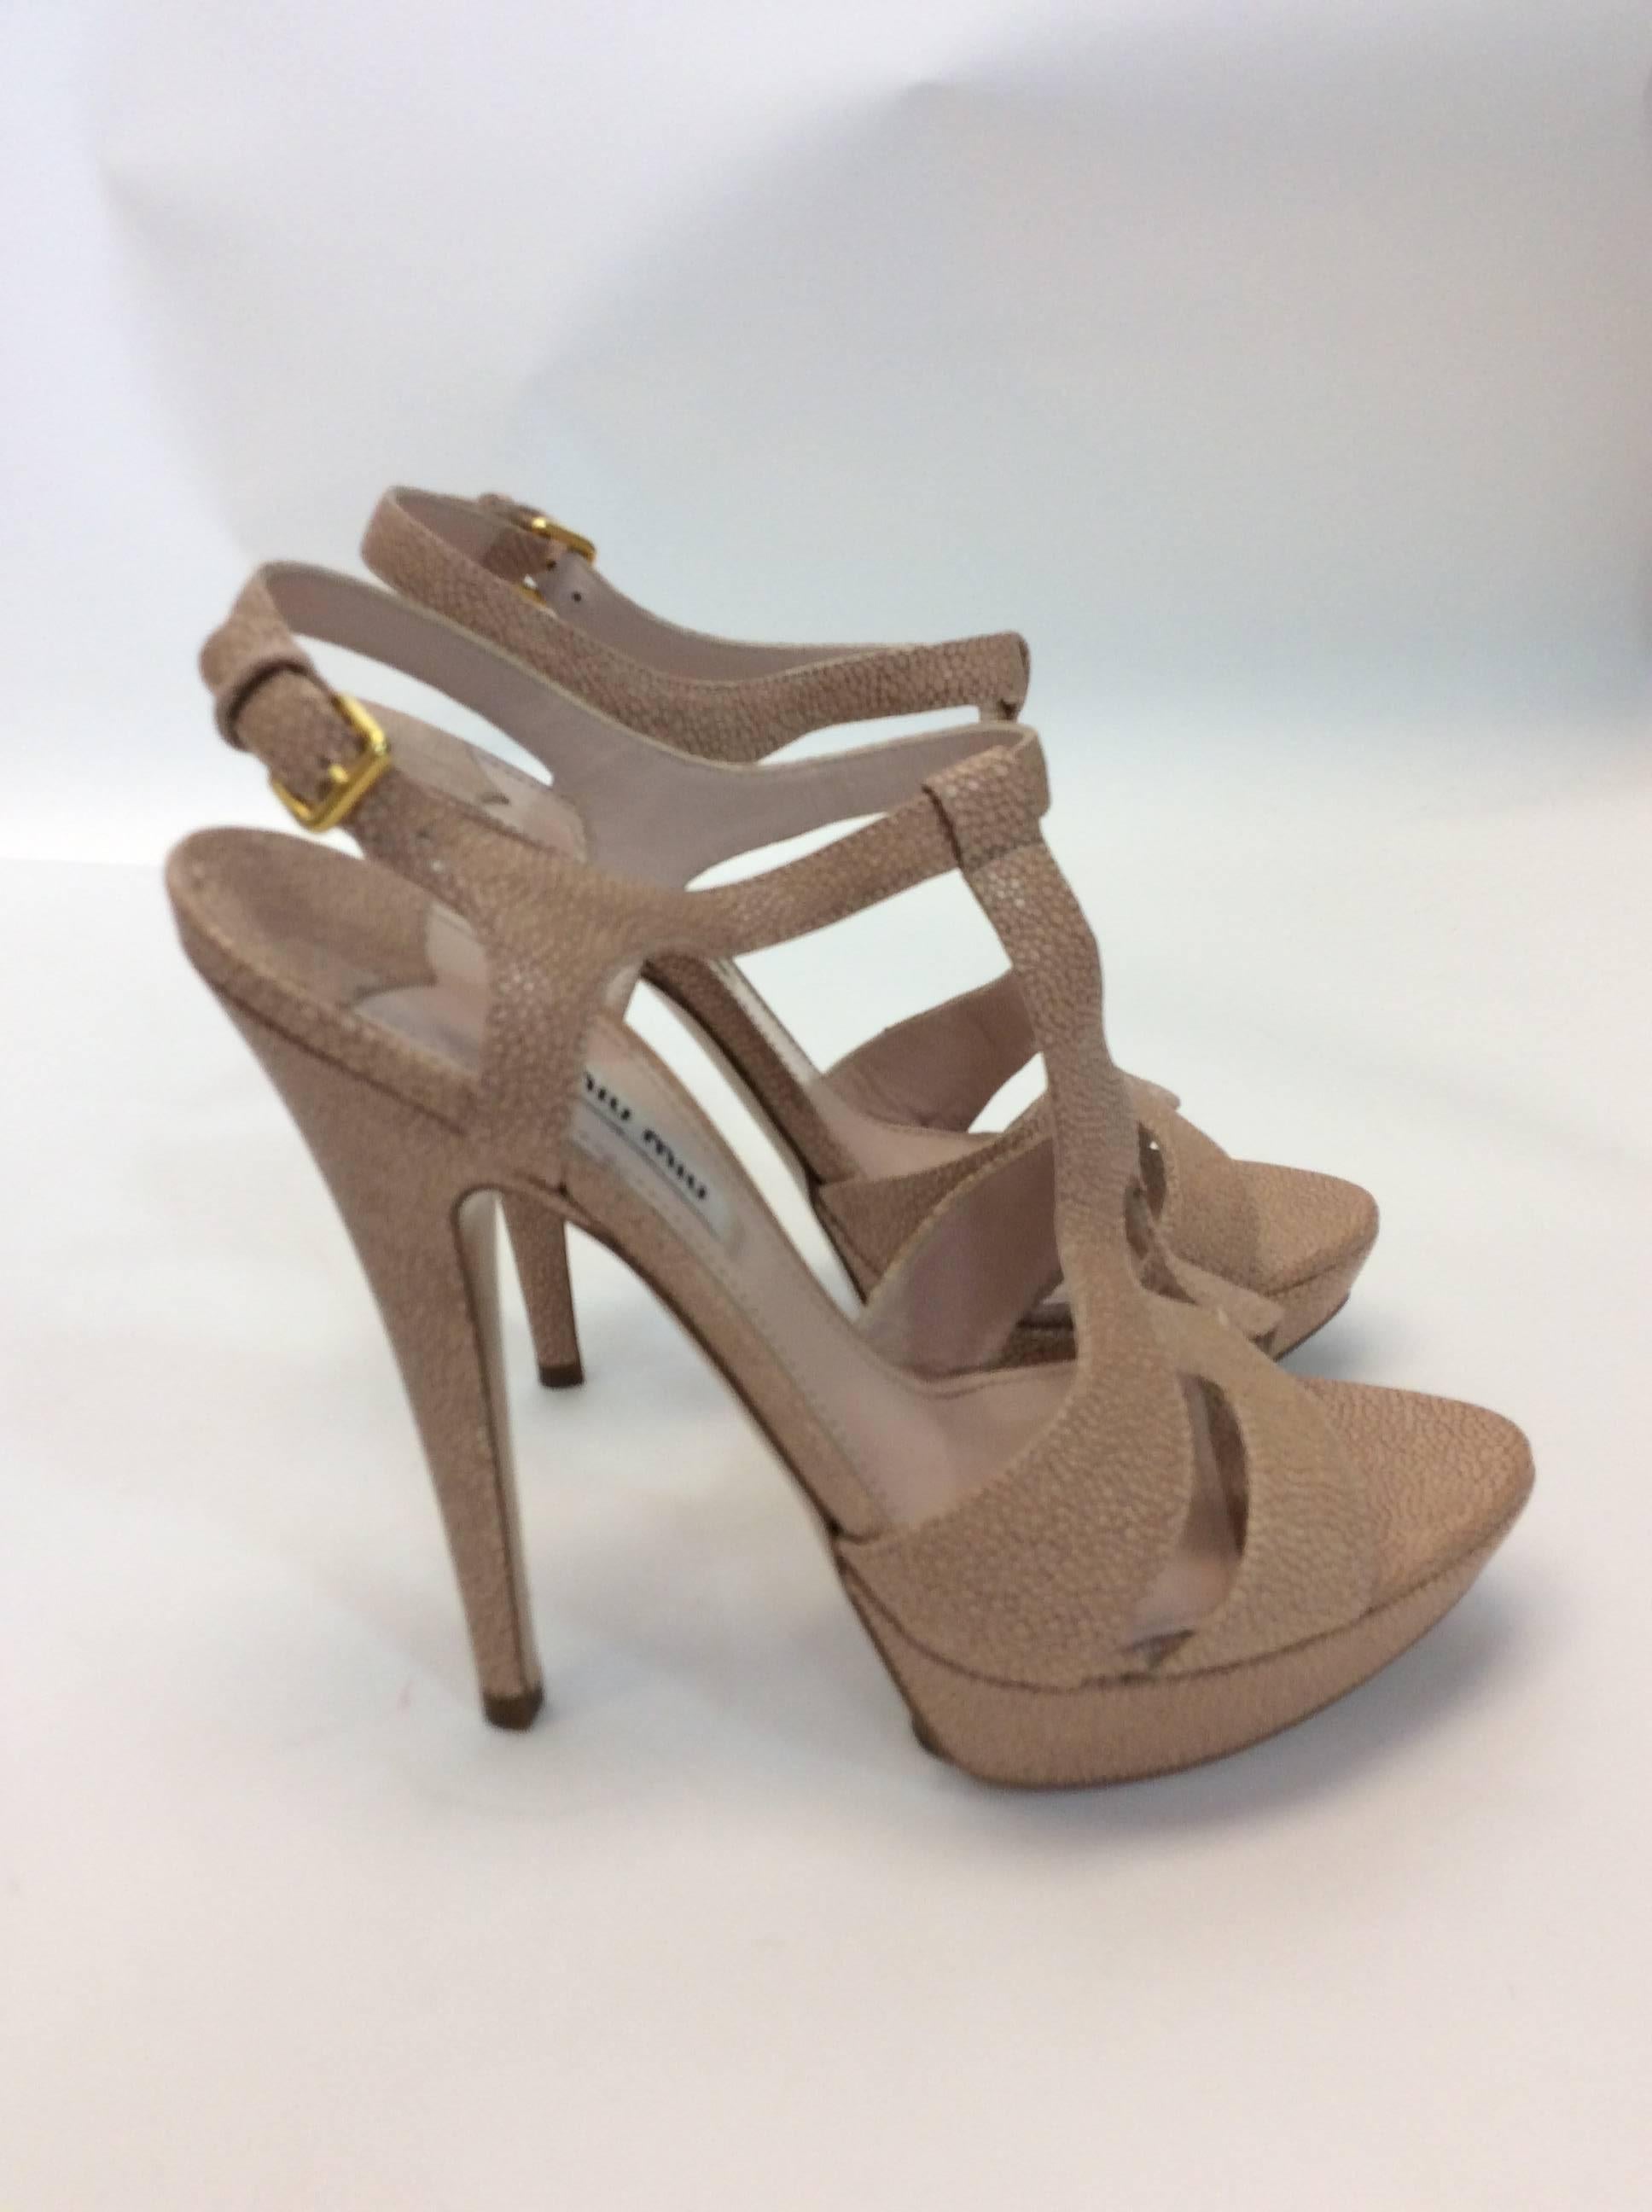 Miu Miu New Nude Sandal Pumps In New Condition For Sale In Narberth, PA